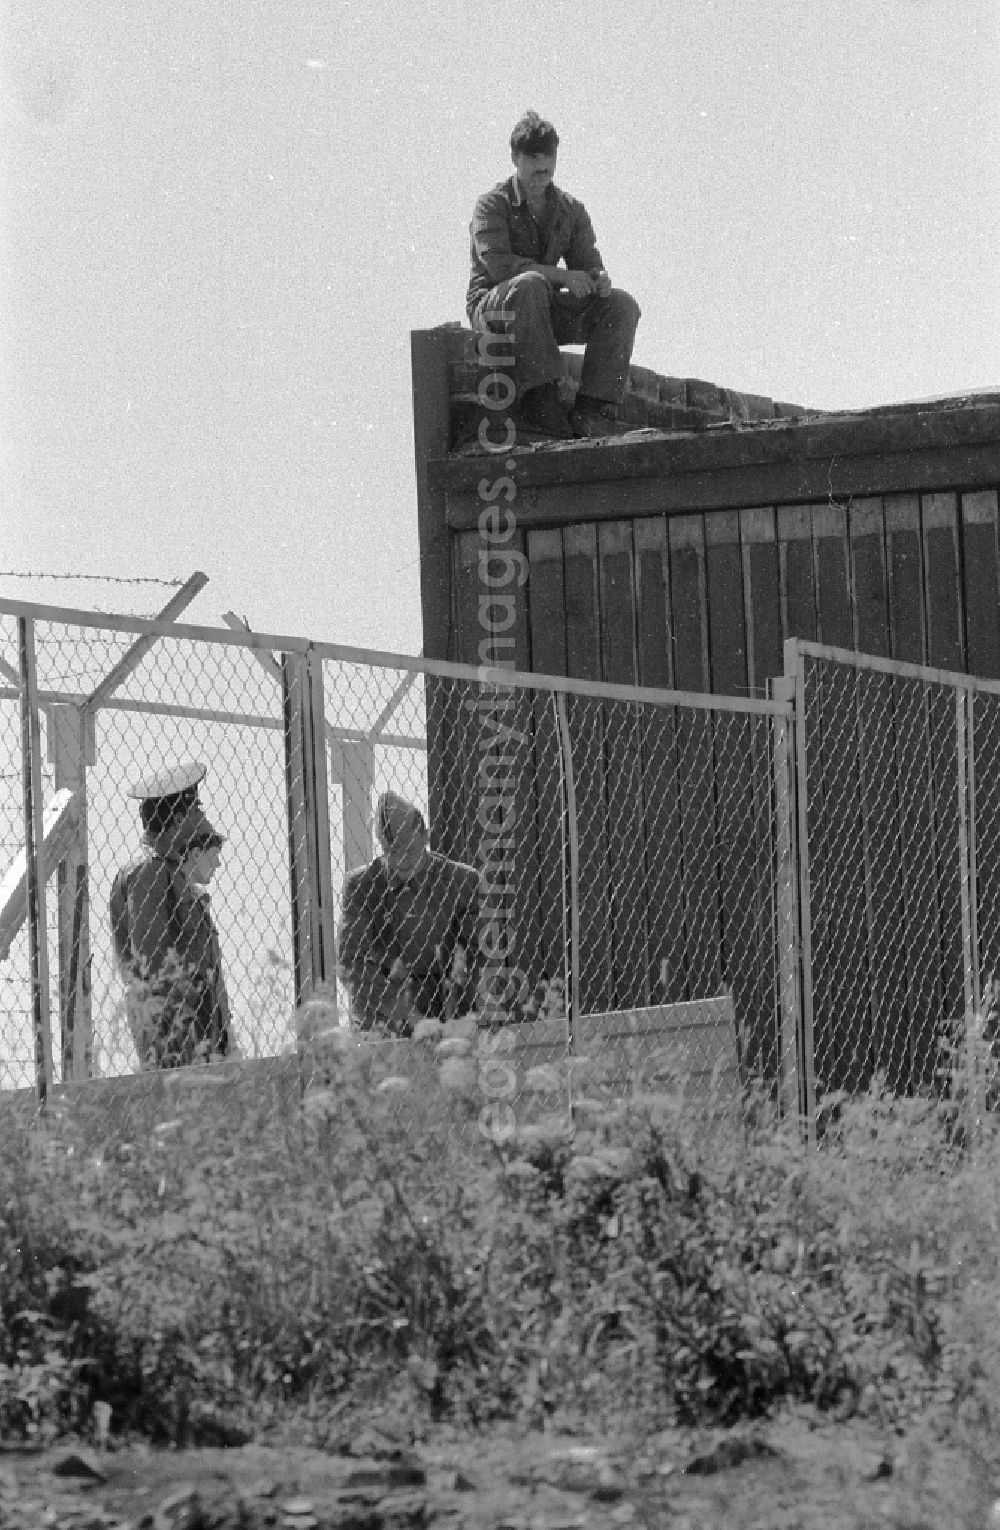 Schierke: Dissolution and withdrawal work in the object of the military base of the listening post of the Red Army - GSSD (Group of Soviet Armed Forces in Germany) on the plateau of the Brocken summit in Schierke in the state of Saxony-Anhalt in the area of the former GDR, German Democratic Republic